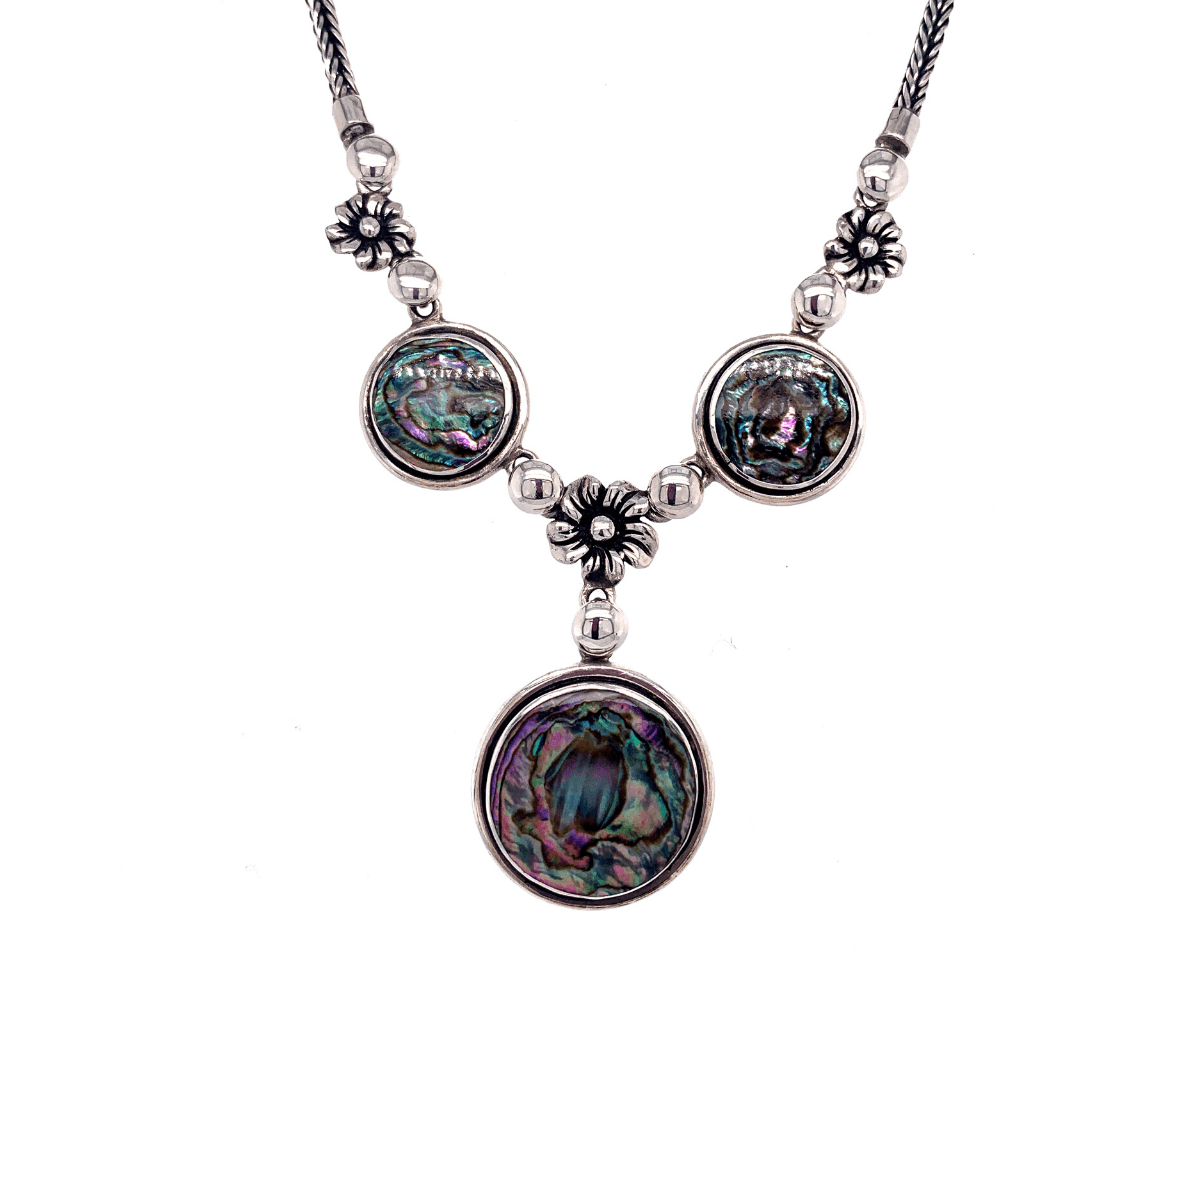 Abalone Shell Disks & Flowers Sterling Silver Necklace - Qinti - The Peruvian Shop